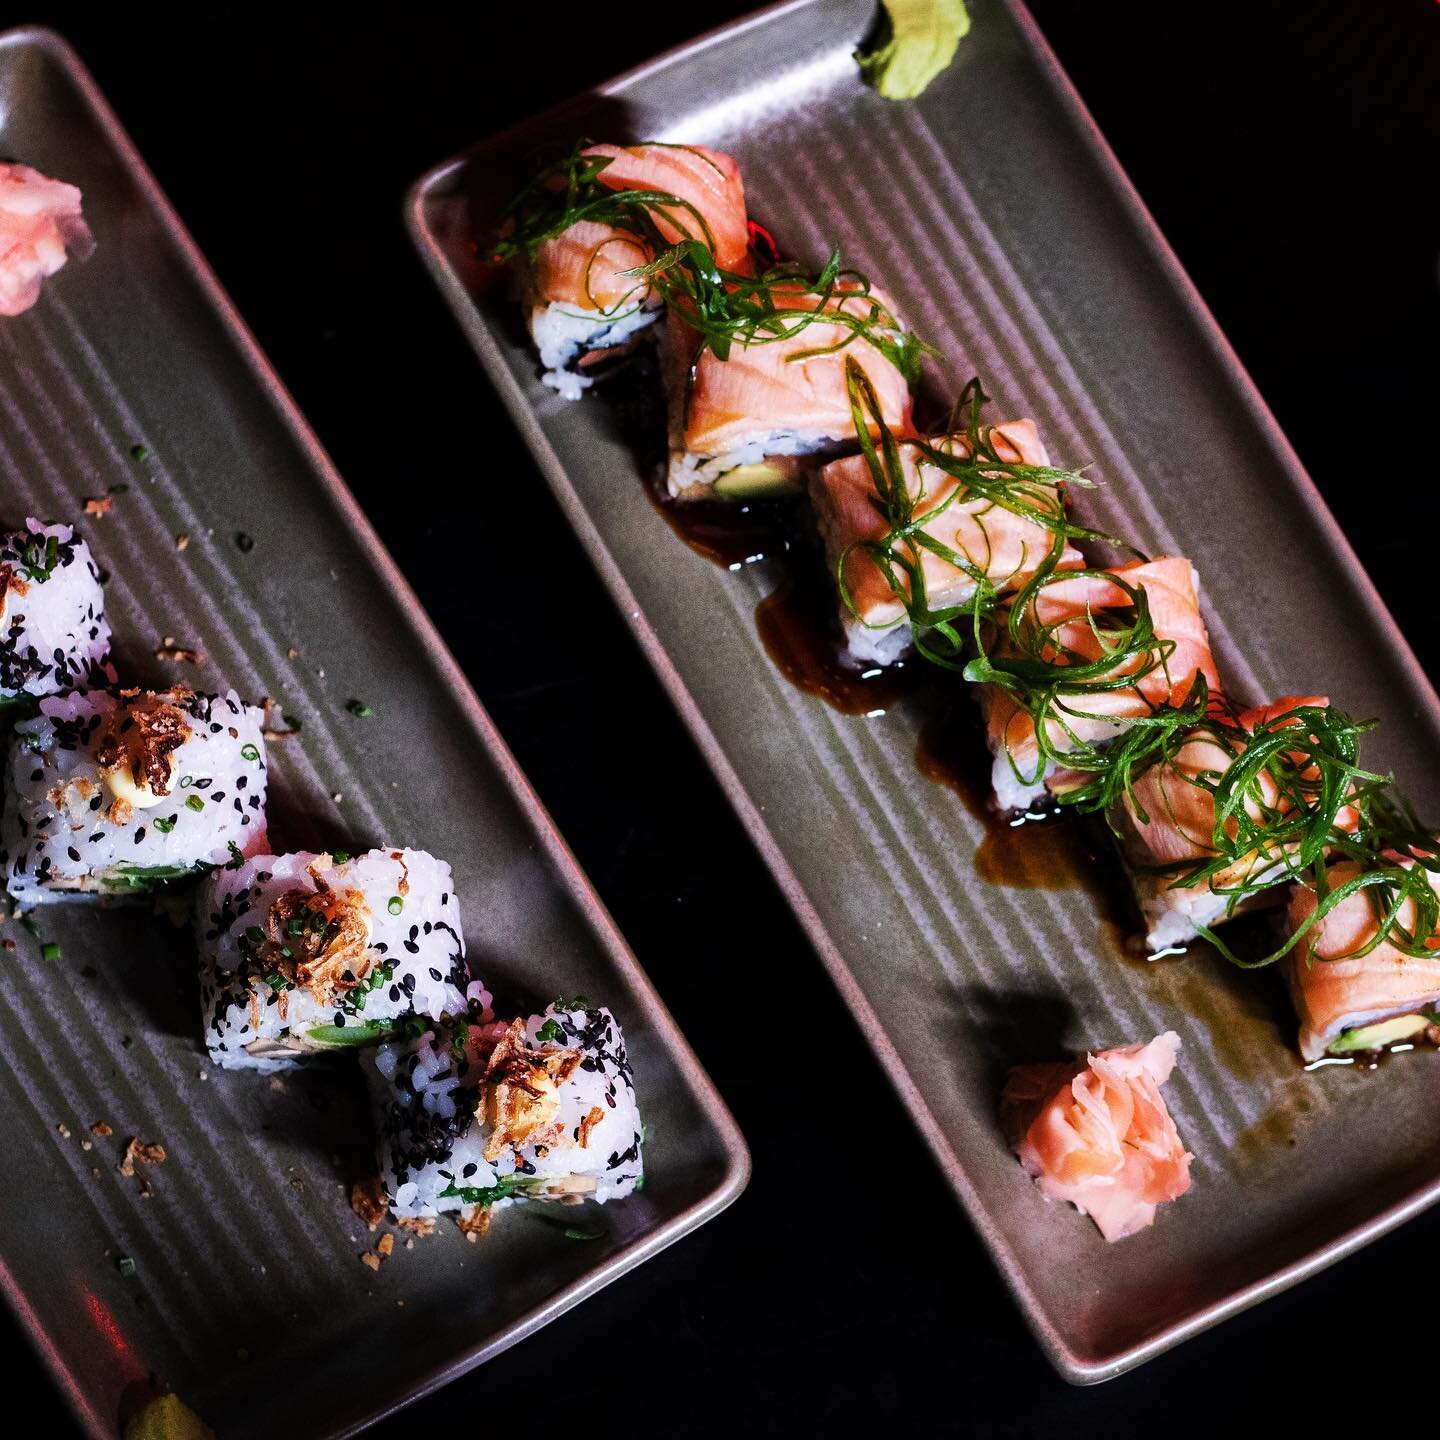 Sushi lovers, we&rsquo;re back OPEN and ready to roll! Grab a seat at our table - only a few spots left.
Book now before they&rsquo;re gone! 

#SushiNight #BookNow #byronbay #tokyodoll #tokyodollbyronbay #byronfood #byronbayfood #byronbayrestaurants 